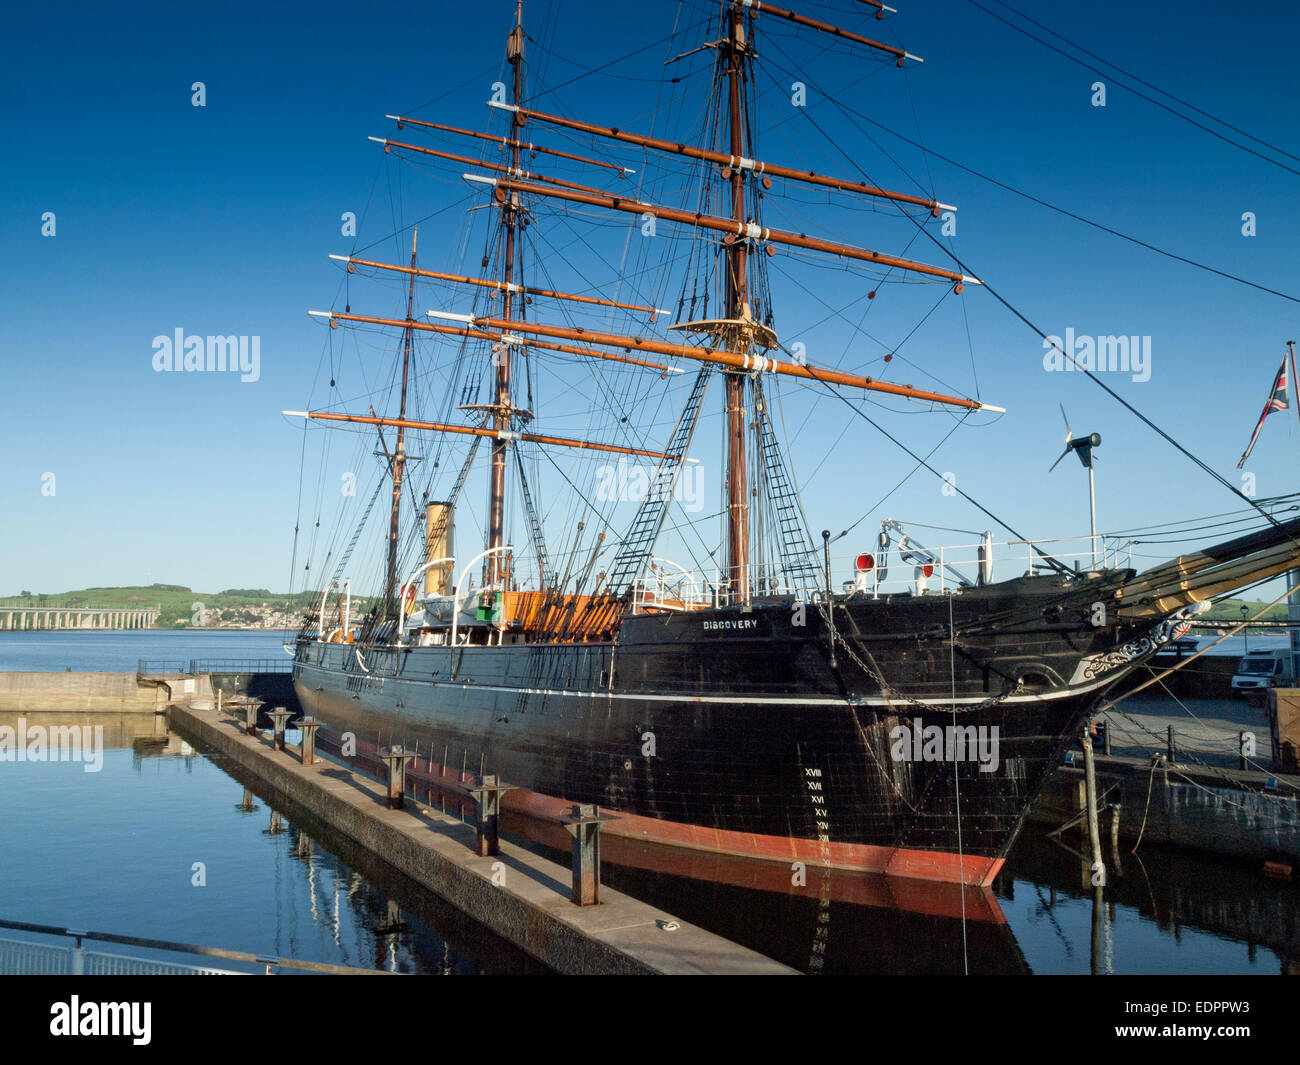 Rrs discovery point tay estuario museum dundee spedizione in Antartide Foto Stock